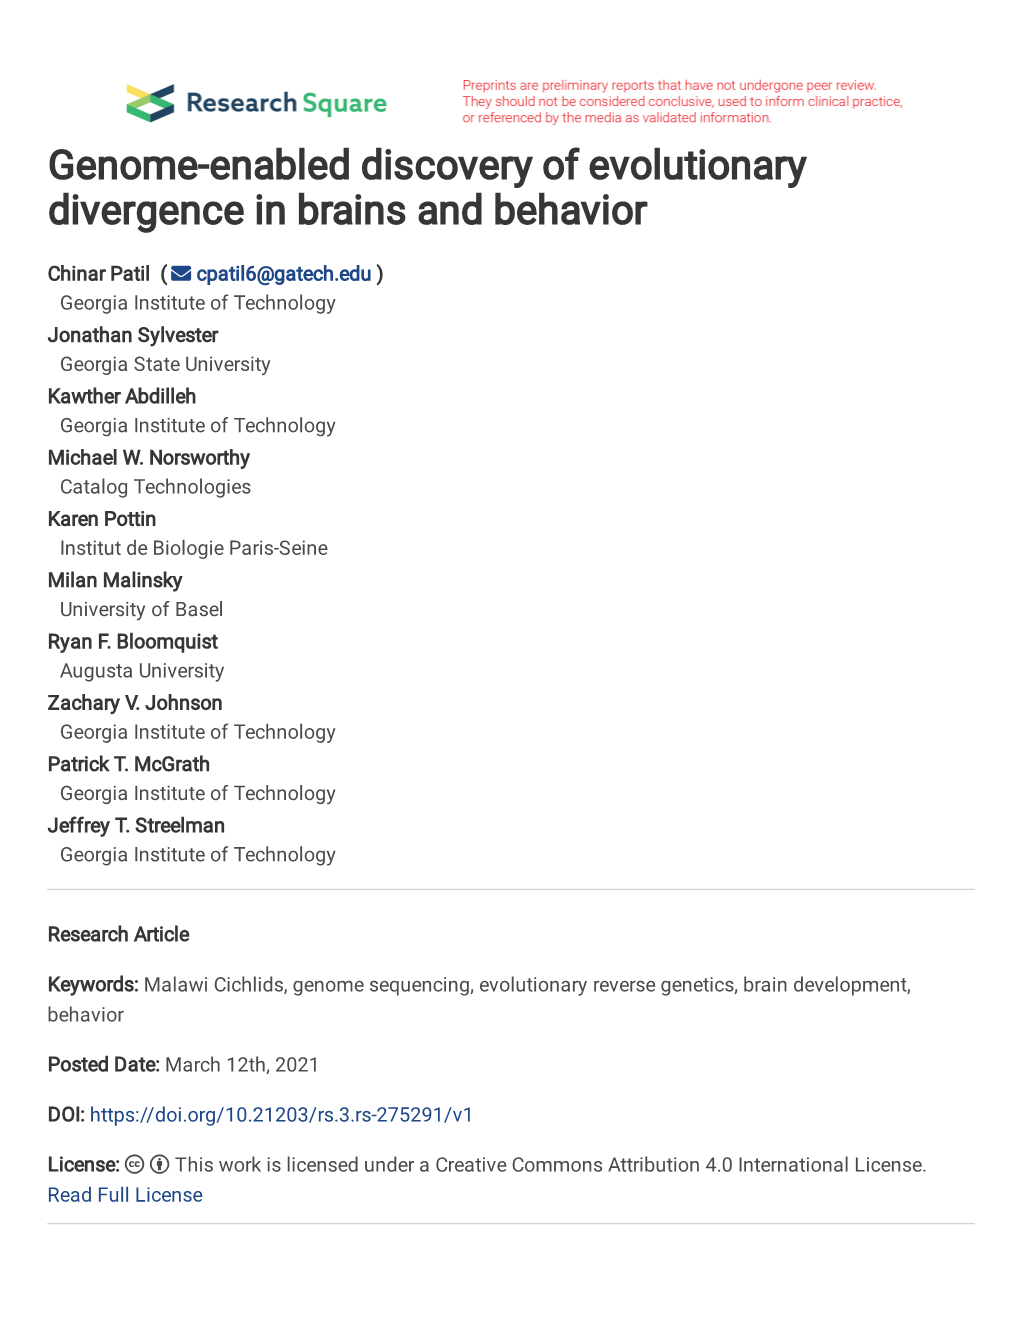 Genome-Enabled Discovery of Evolutionary Divergence in Brains and Behavior